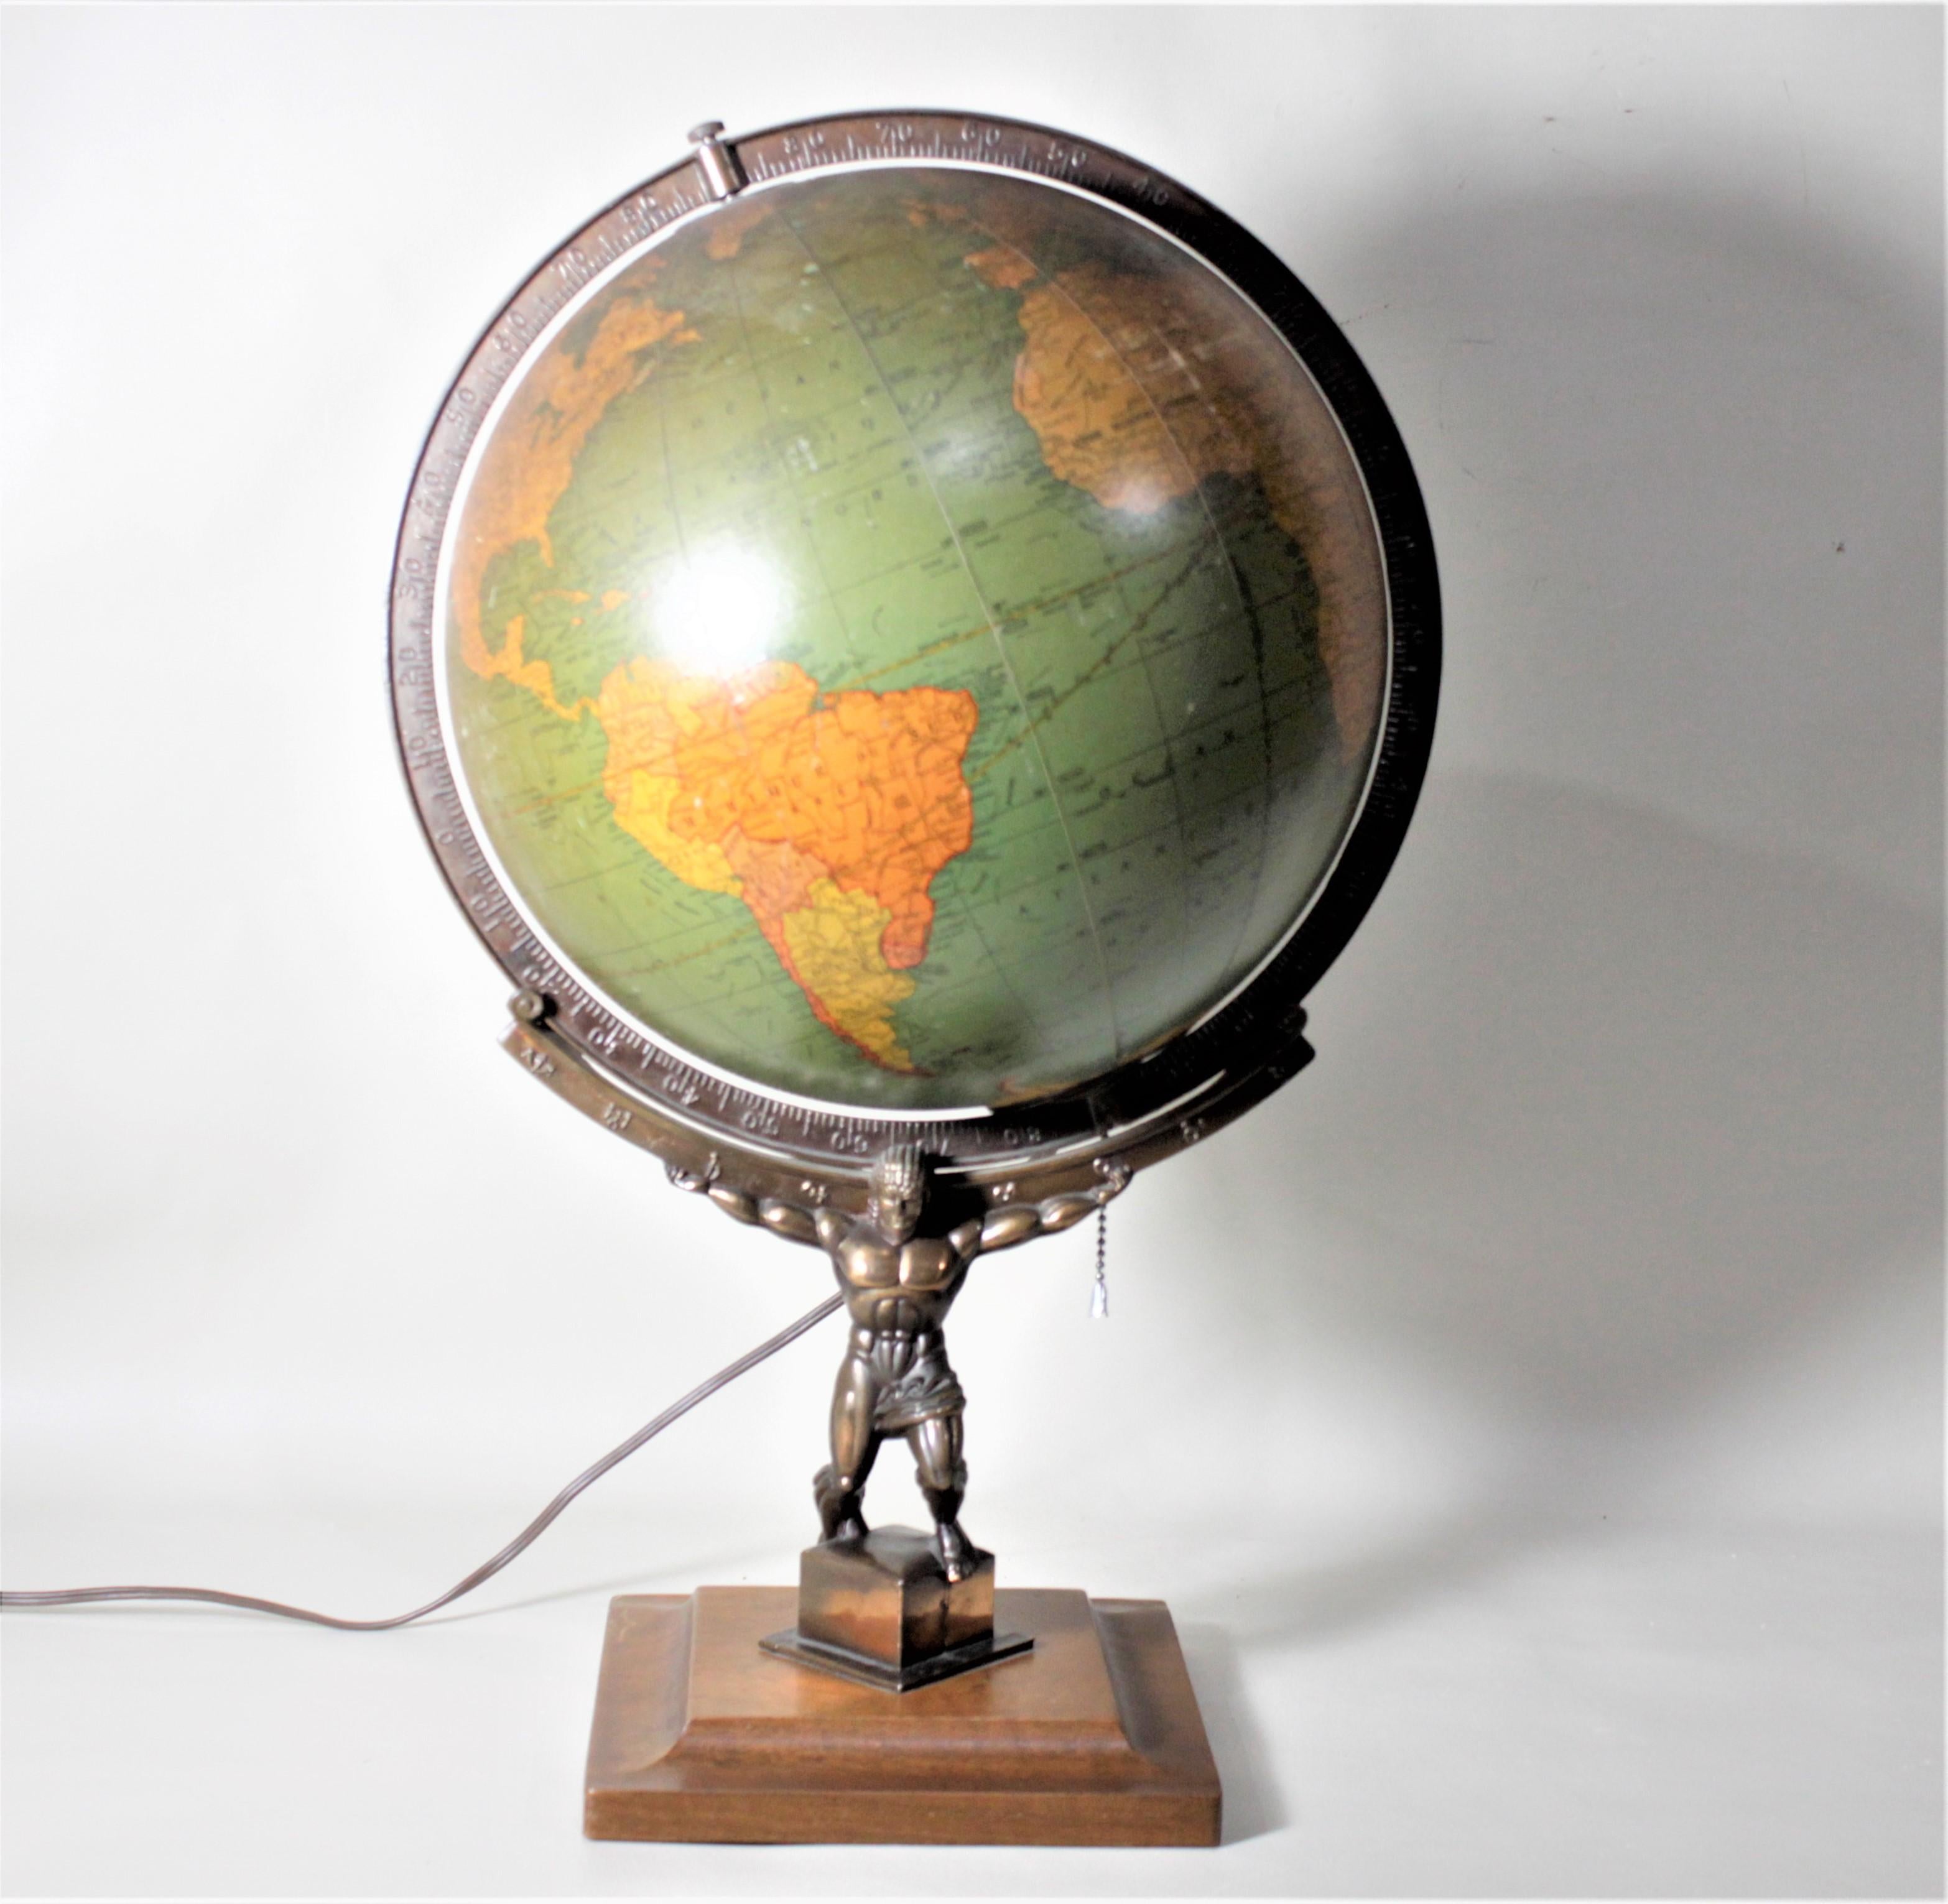 This illuminated terrestrial globe was made by the George F. Cram Company of the United States who is well known for the production of initially maps and diversified to include globes since 1928. This globe is presumed to have been made in